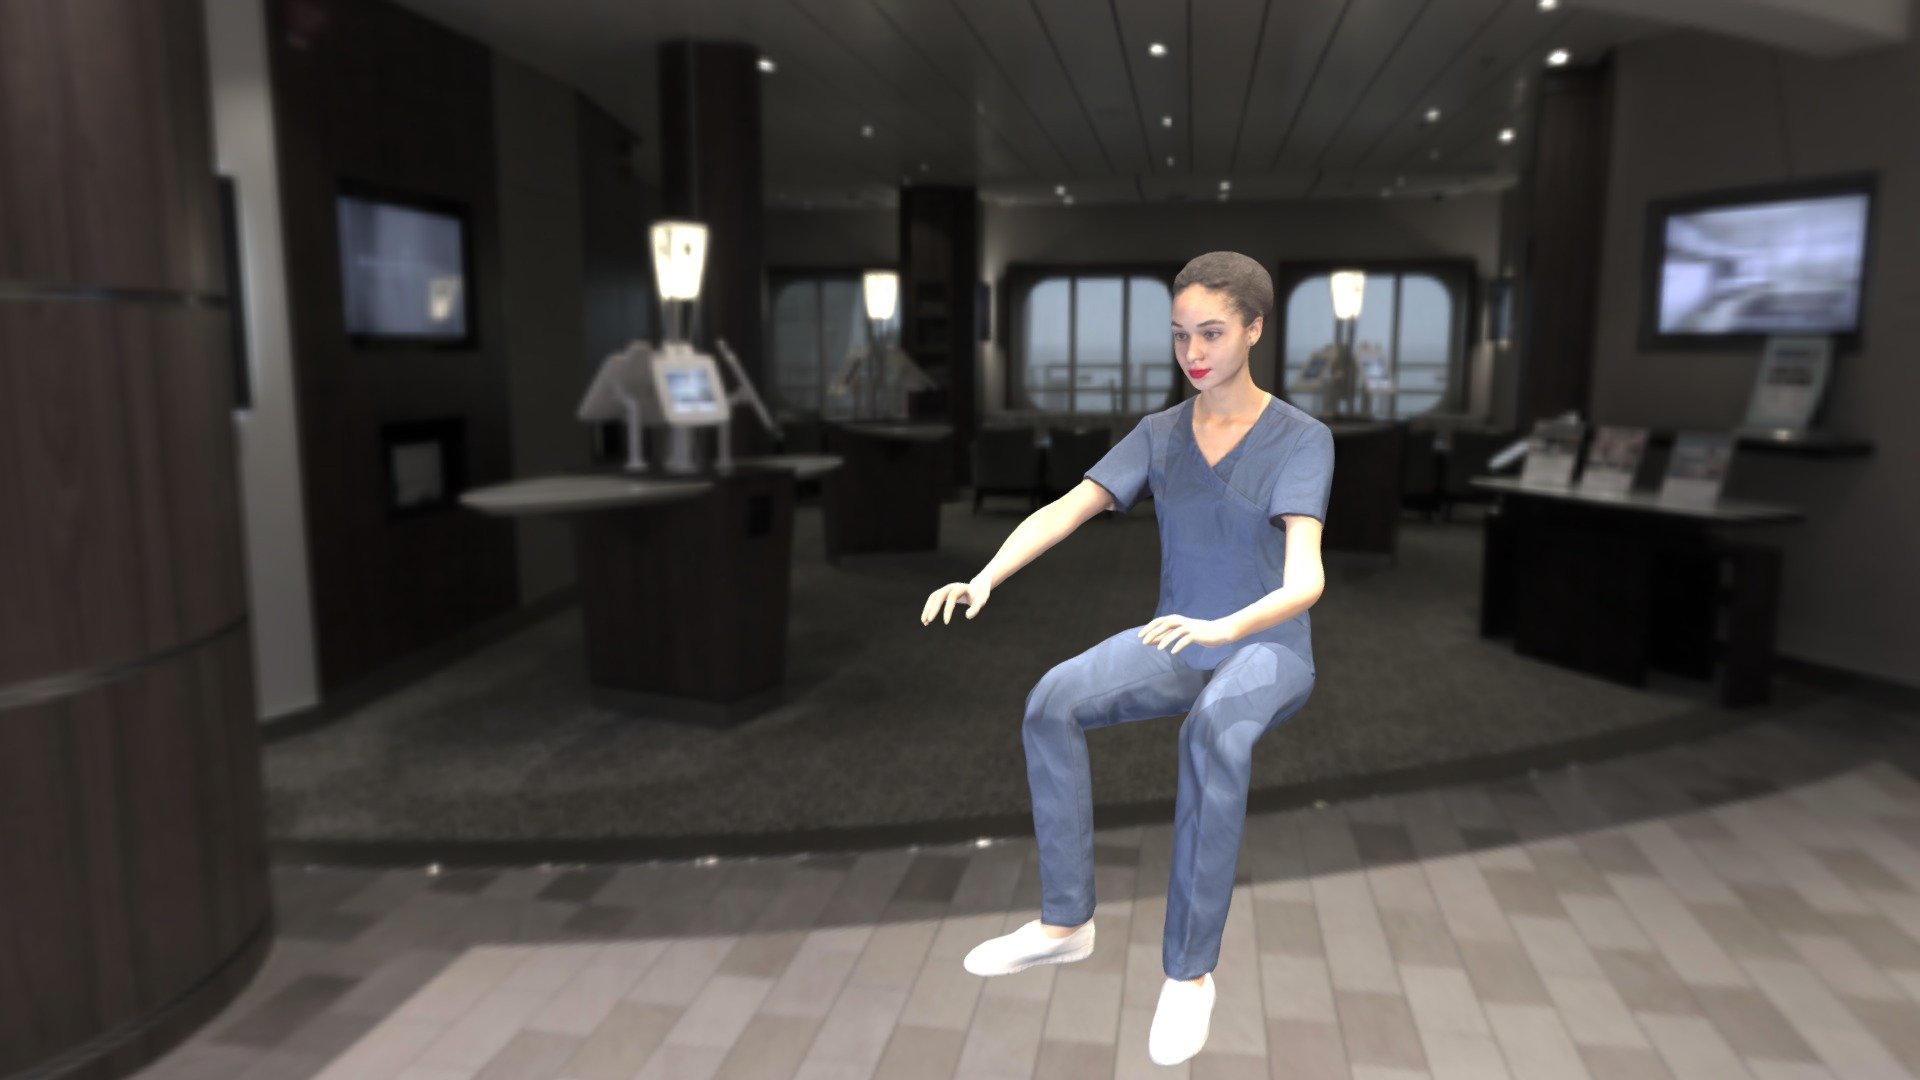 This is a true human size and detailed model of a young woman of Caucasian appearance dressed in surgical uniform. The model is rigged via Mixamo and saved in .fbx animation format. Additionally you can find this model captured in A-pose, ready for further custom rigging and animation.

Animation styles applied:




performing CPR

walking

helping out

talking on a phone

greeting

typing

working on device

Technical specifications:




digital double scan model

low-poly model

high-poly model (.ztl tool with 5 subdivisions)

fully quad topology

sufficiently clean

edge loops based topology

ready for subdivision

8K texture color map

non-overlapping UV map

ready for animation

rigged via Mixamo

PBR textures 8K resolution: Normal, Displacement, Albedo maps

Download package includes a Cinema 4D project file with Redshift shader, OBJ, FBX, STL files, which are applicable for 3ds Max, Unreal Engine, Unity, Blender, etc.

Video preview: https://youtu.be/A5nTDrFHOaI

3D EVERYTHING - Animated medical nurse 352 - Buy Royalty Free 3D model by deep3dstudio 3d model